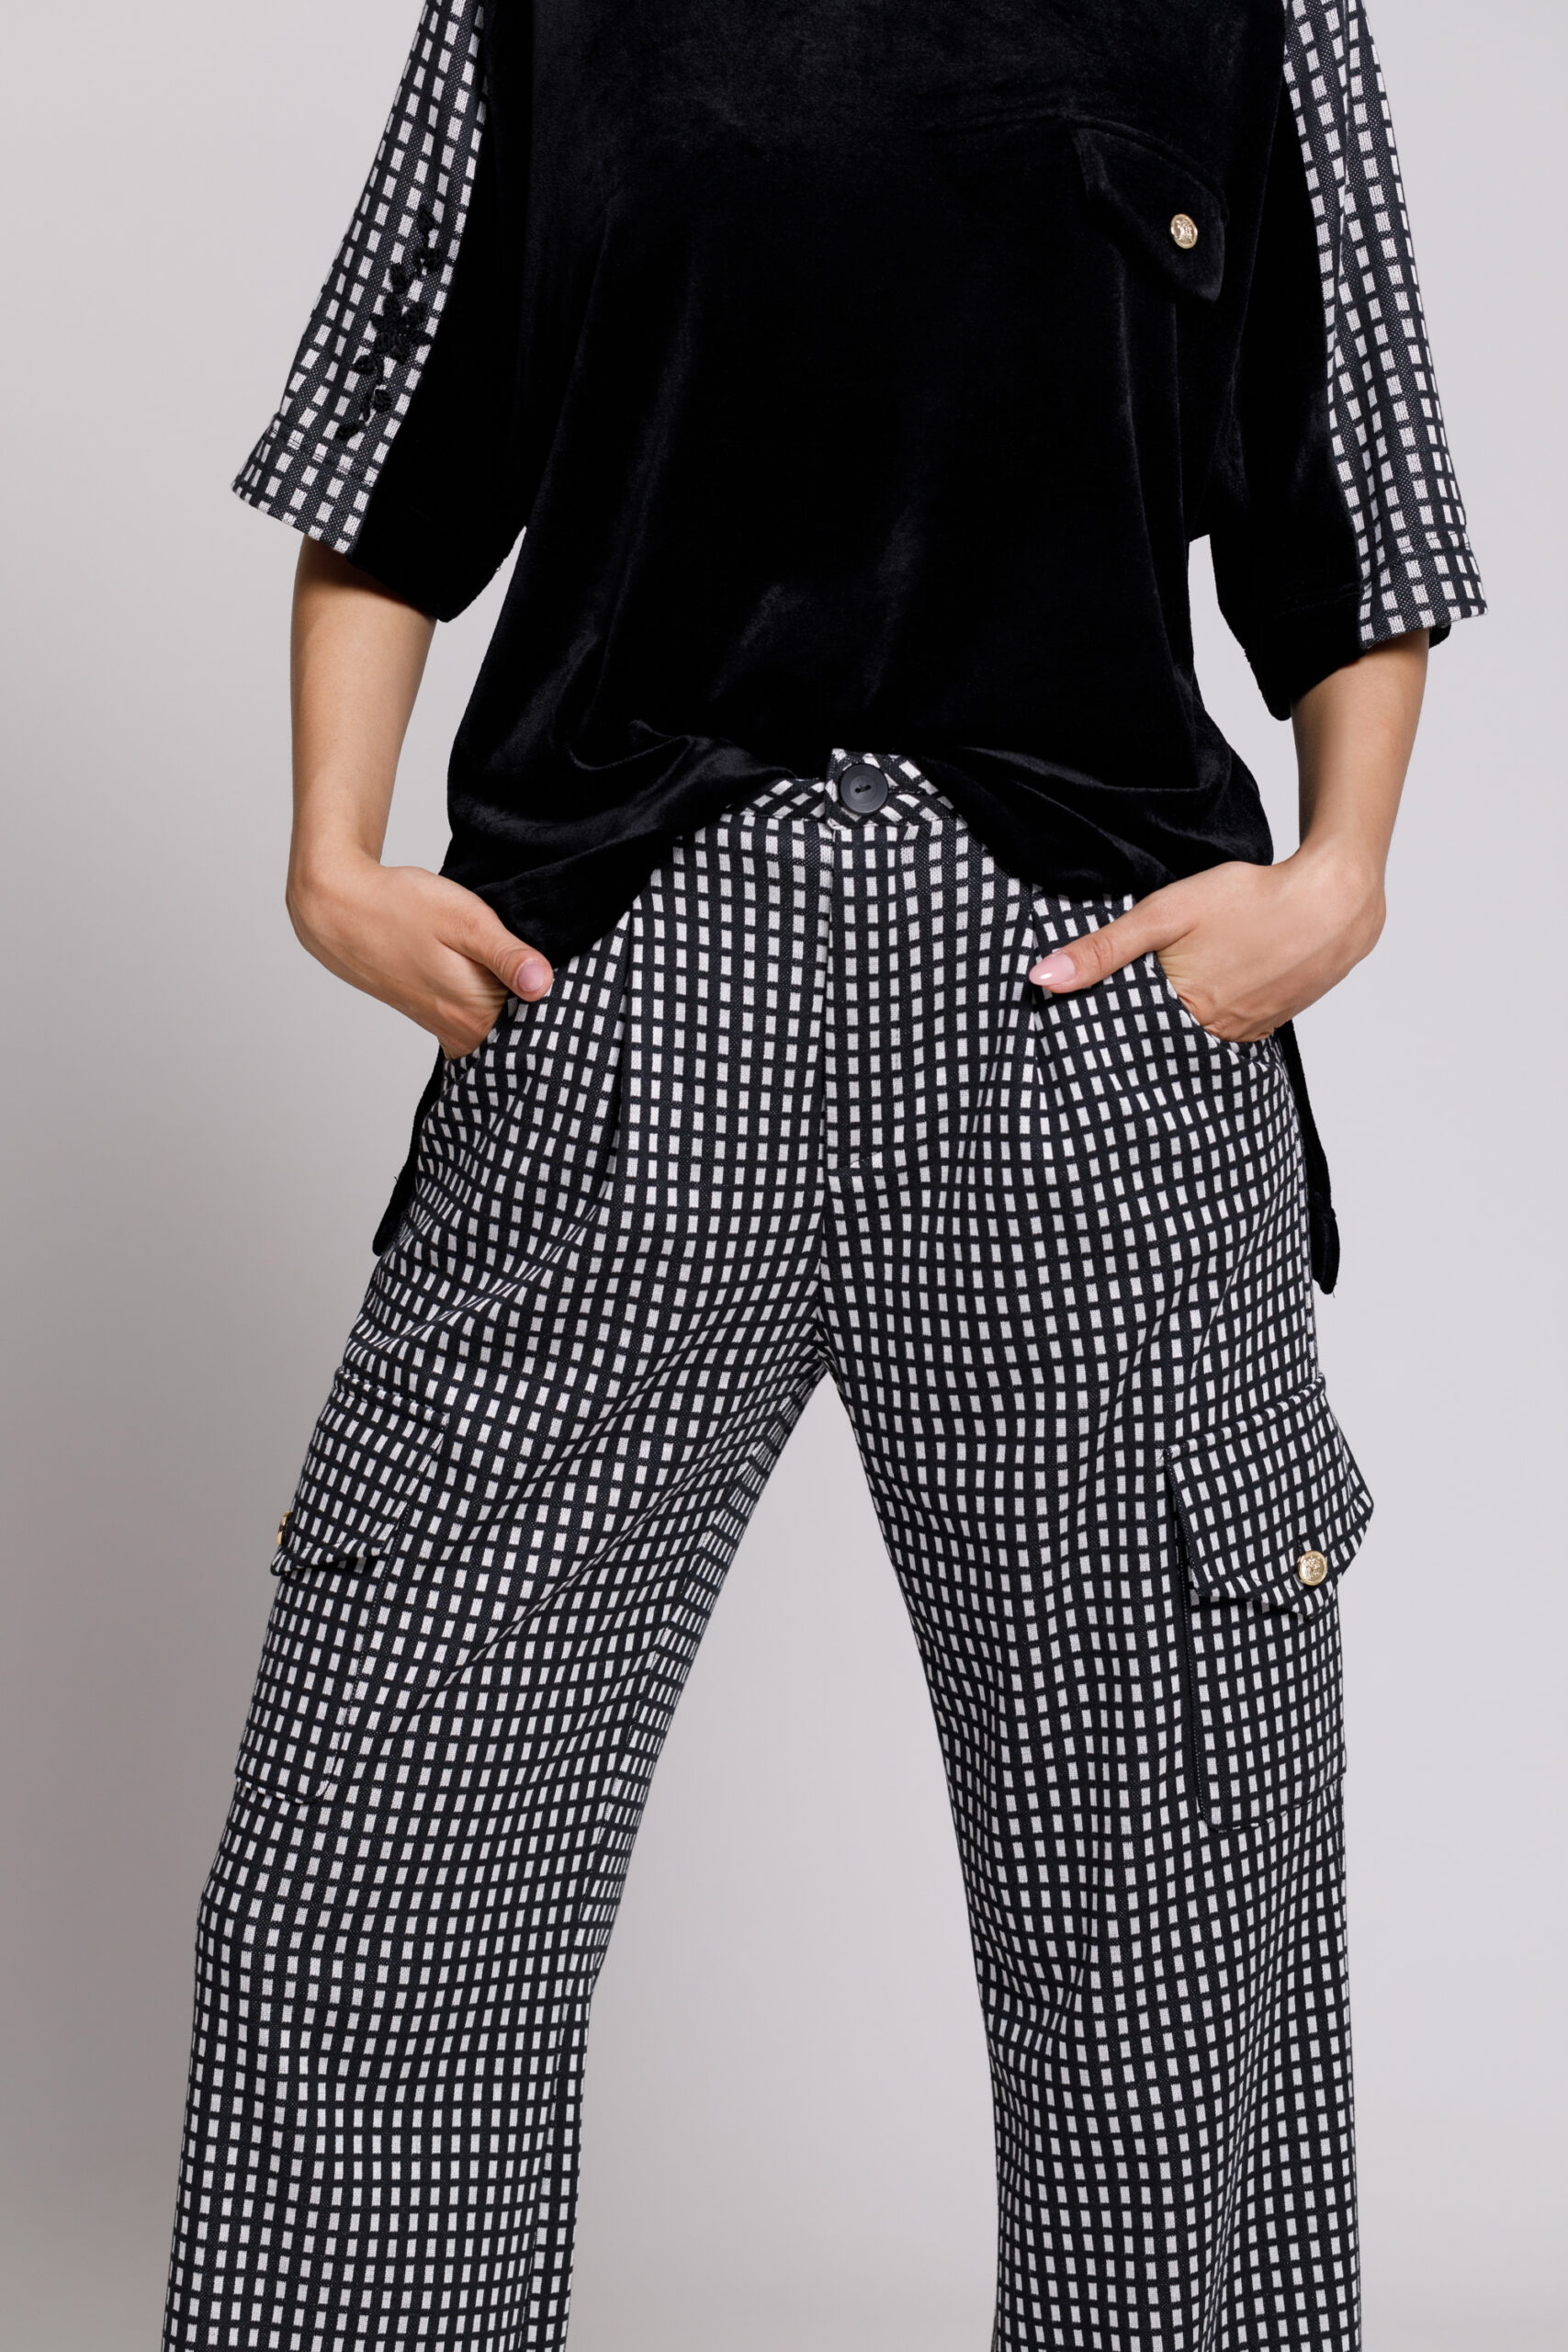 ROWAN casual black and white trousers with bells. Natural fabrics, original design, handmade embroidery